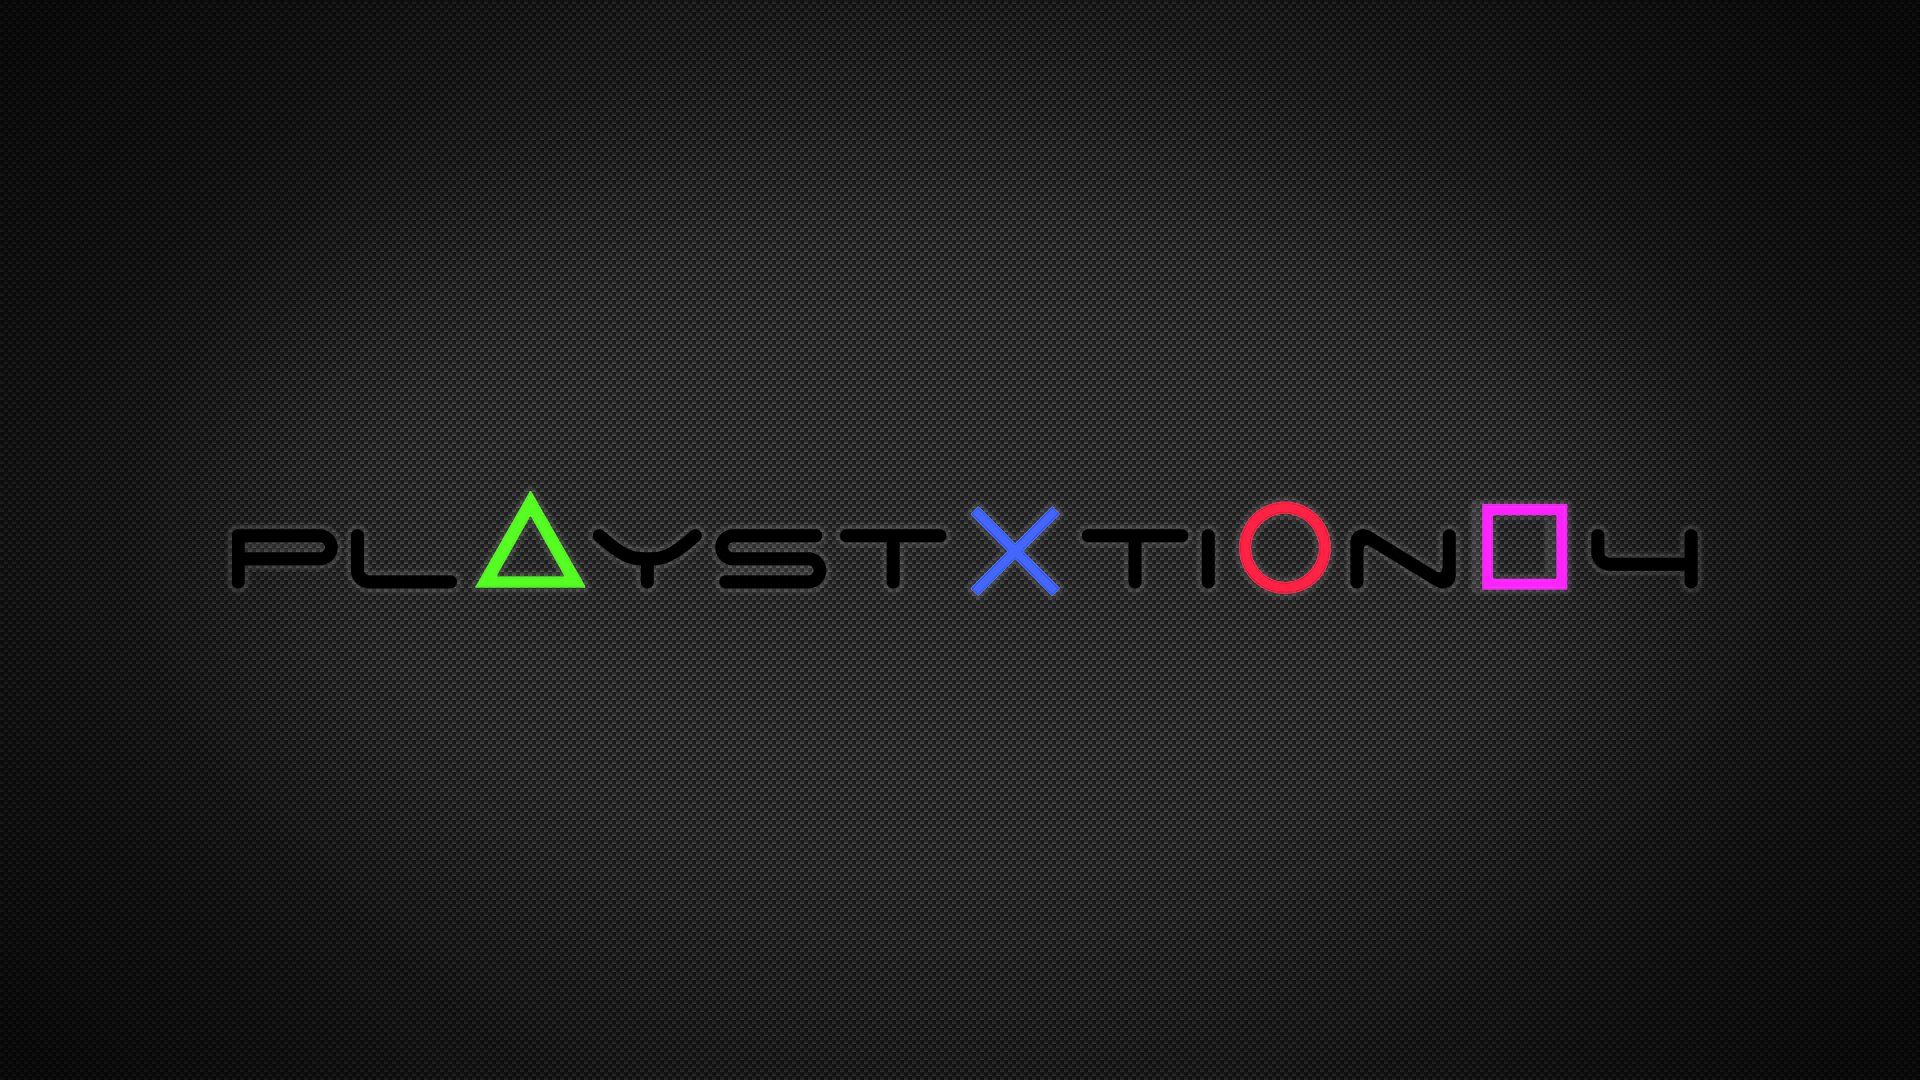 Free download Sony PlayStation 4 Wallpaper [1920x1080]